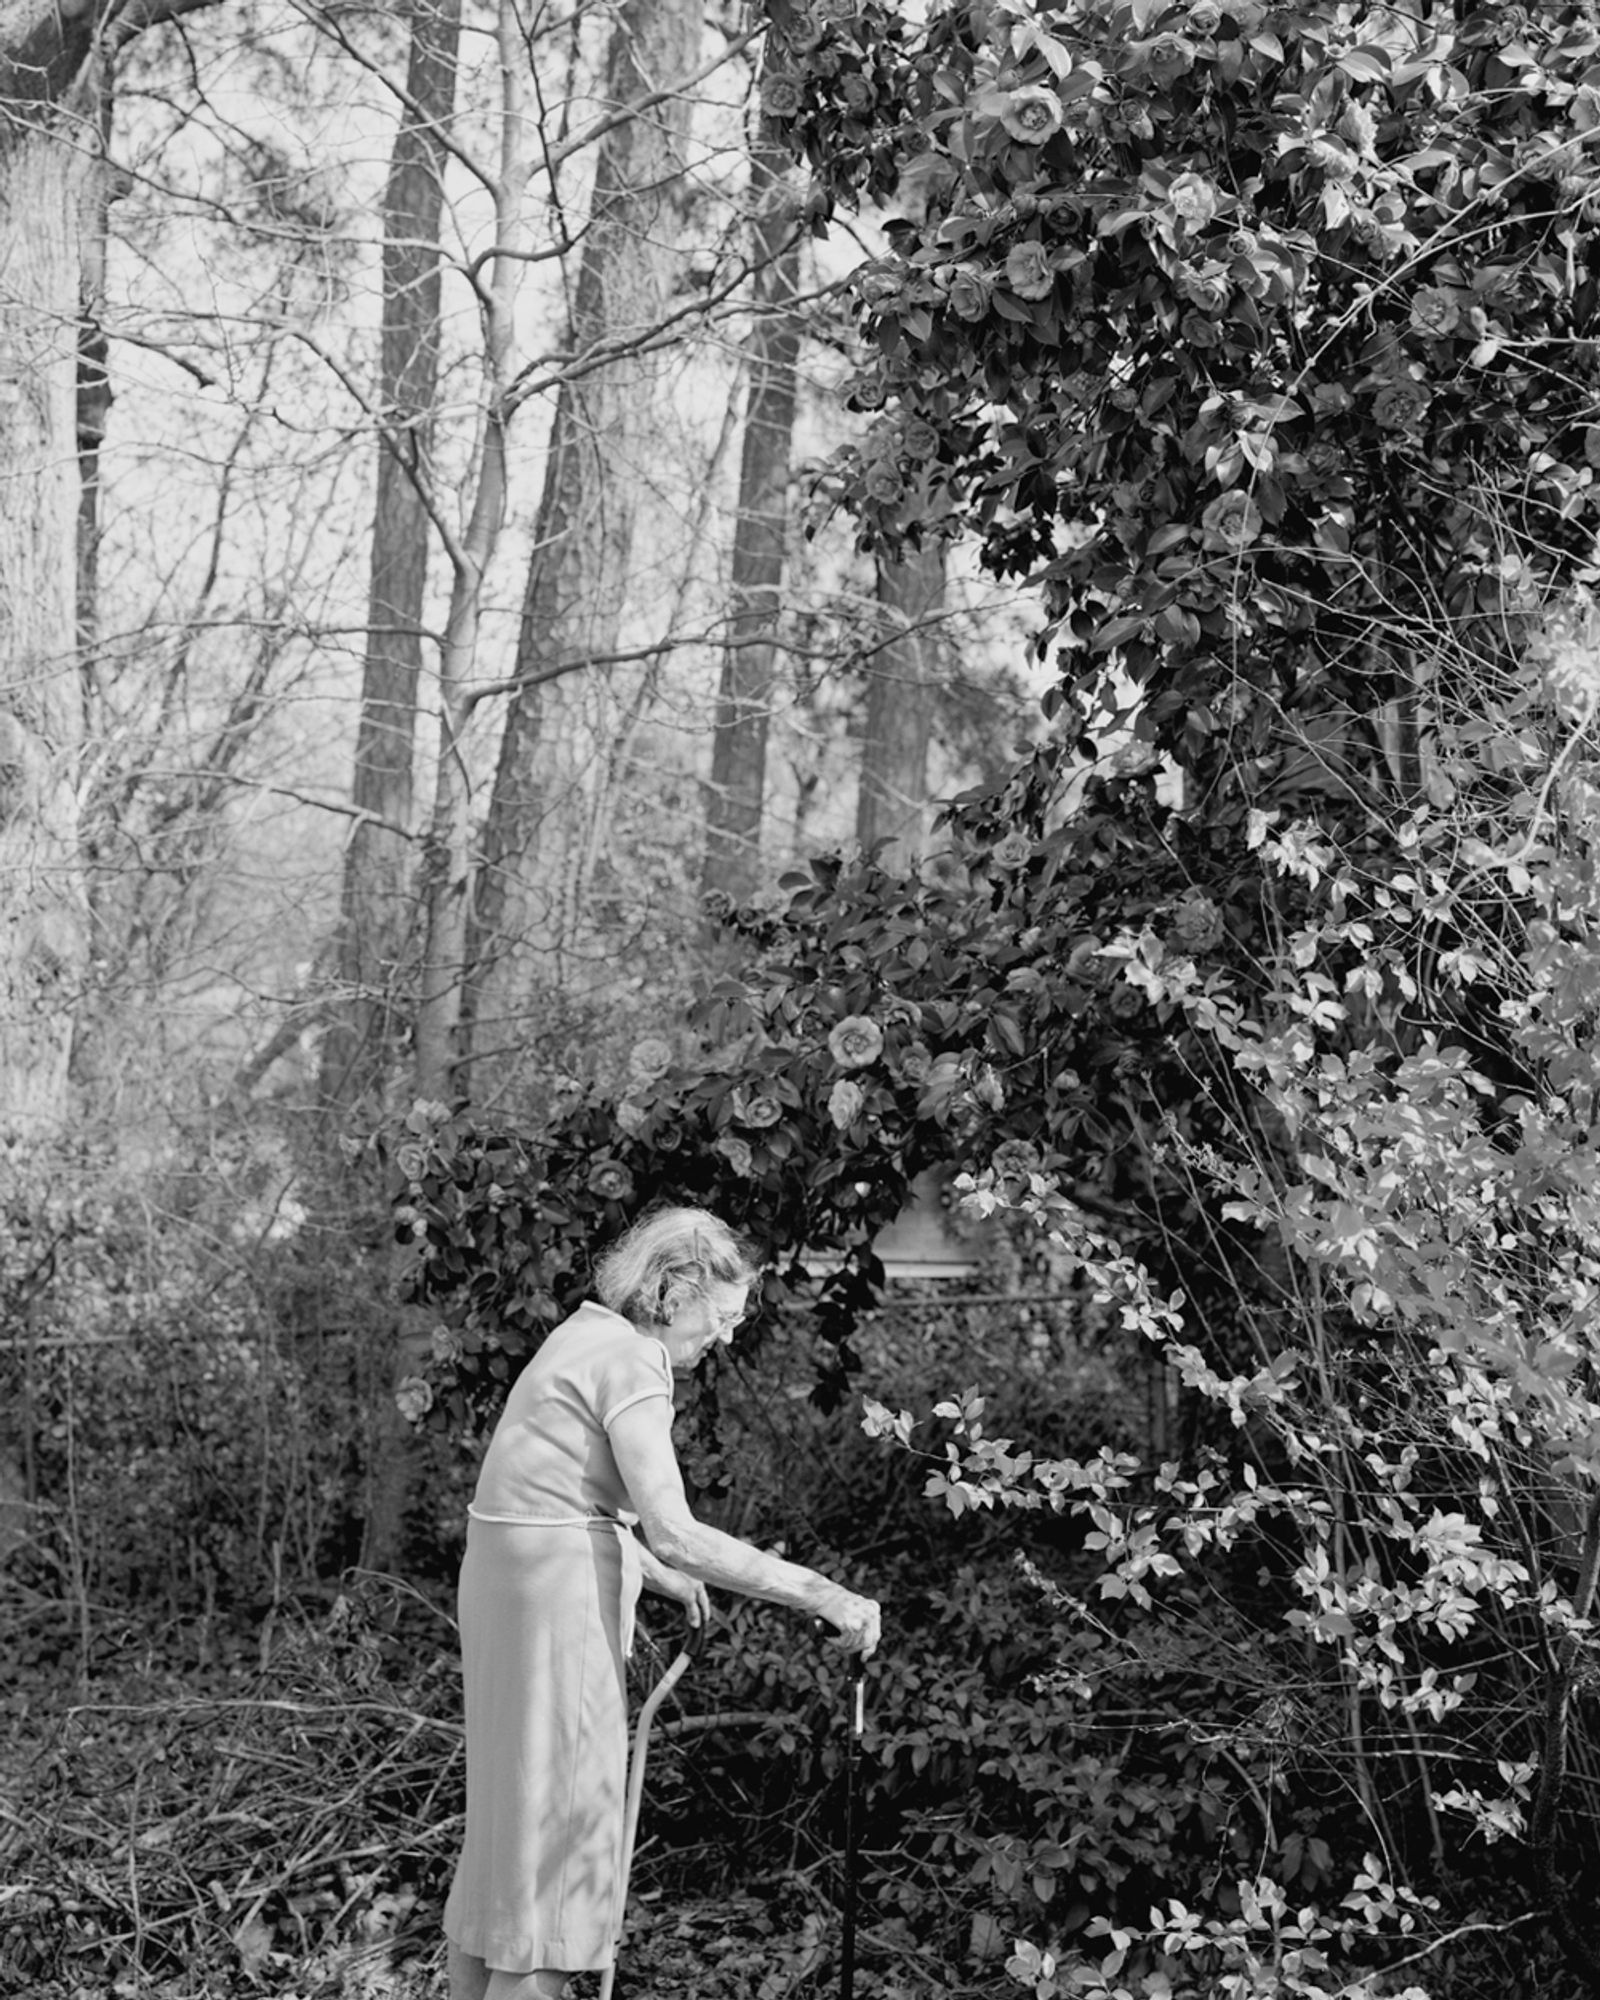 © Susan Worsham - "Margaret with Giant Camellia Japonica" Margaret shows me that my mother's Camellia still flowers in my childhood backyard.